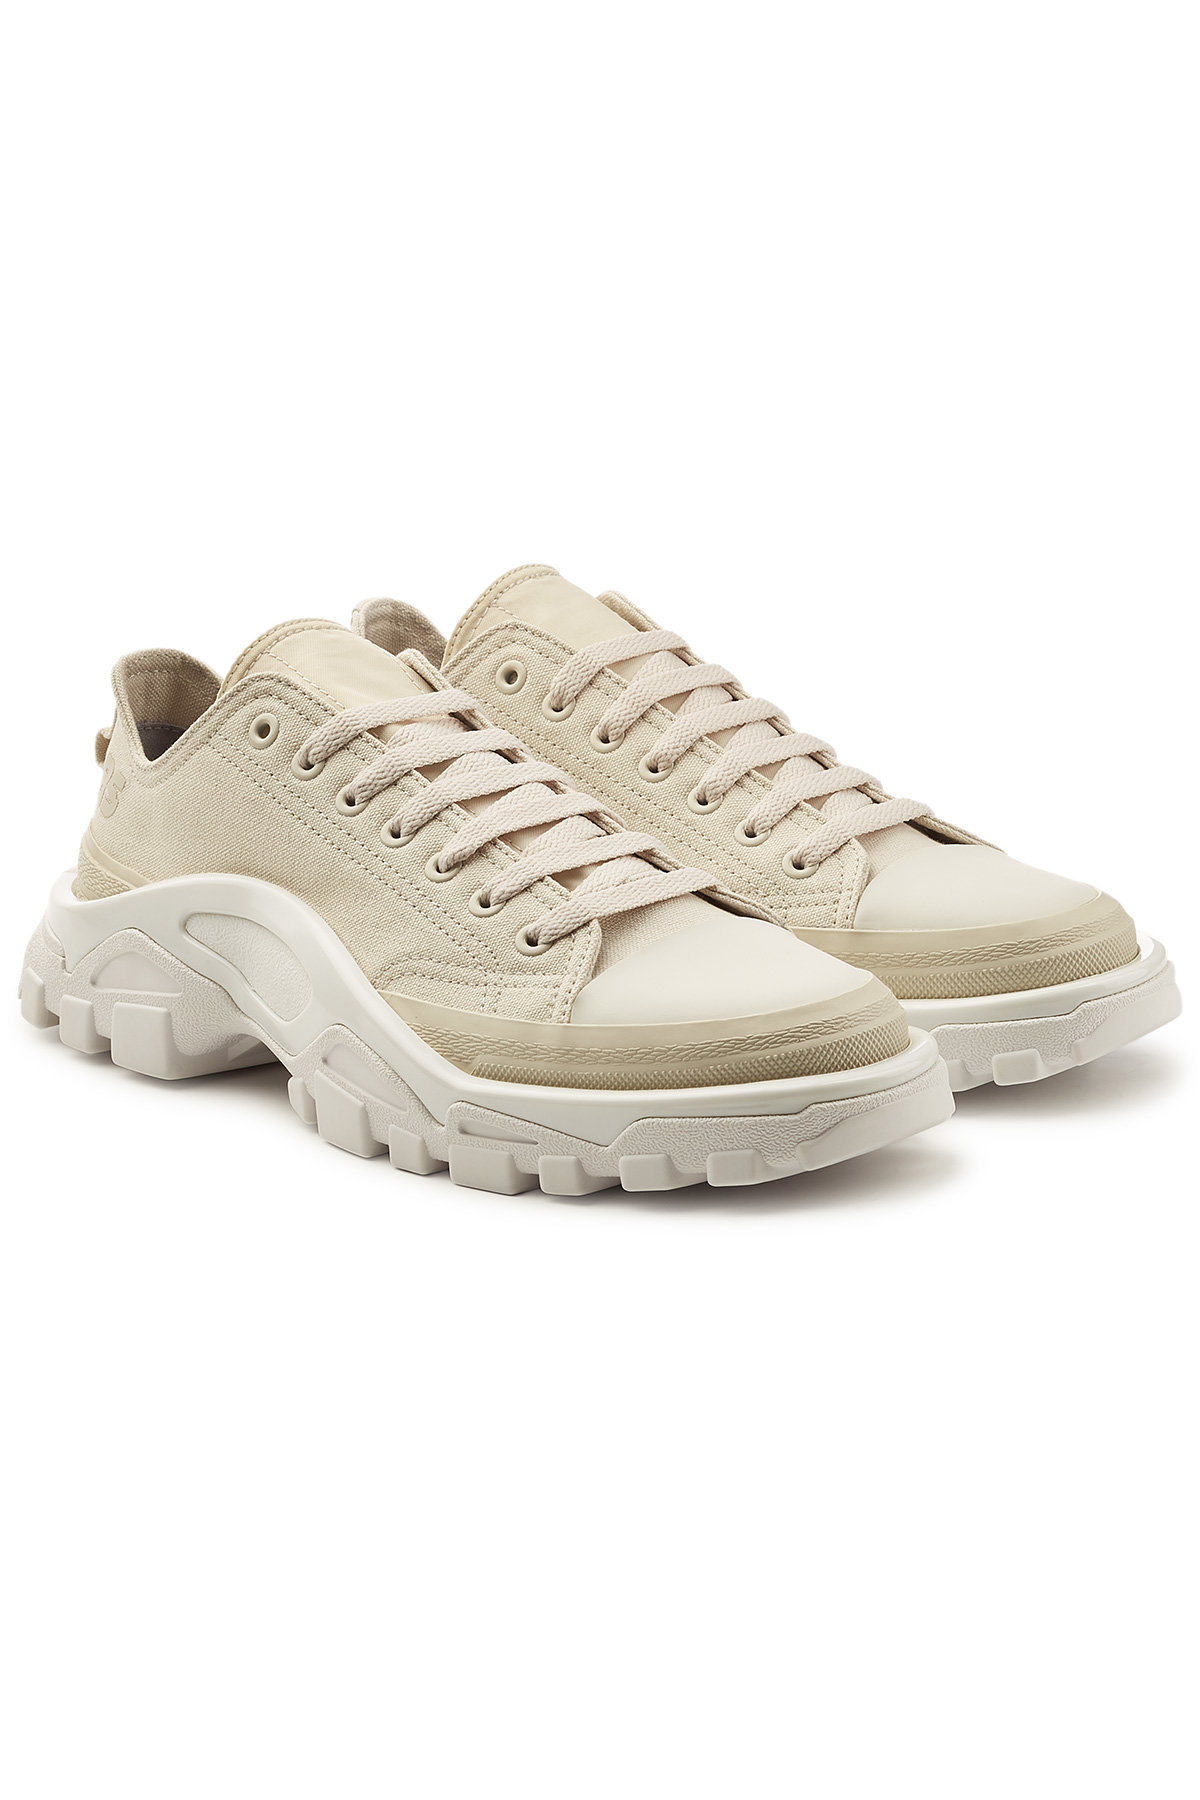 Adidas by Raf Simons - RS Detroit Runner Sneakers